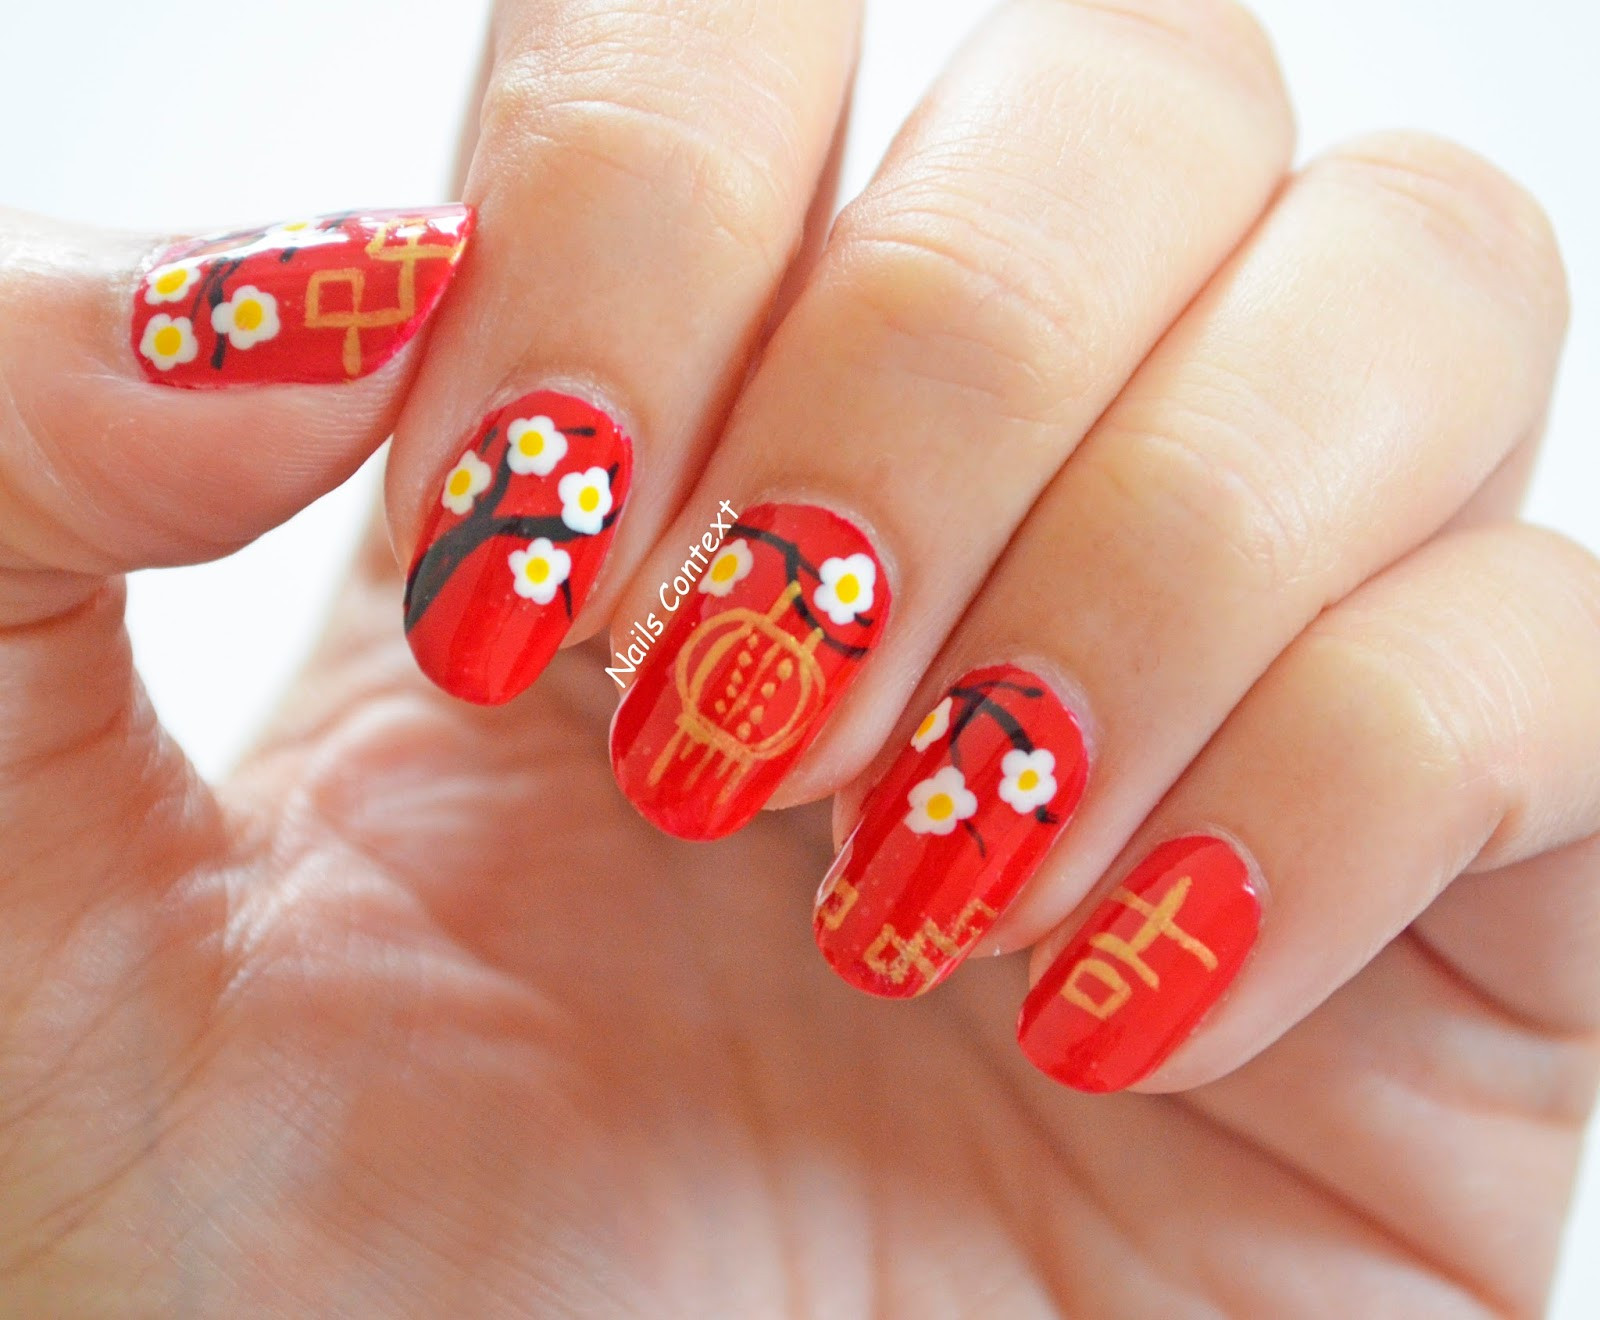 9. Chinese Nail Art Designs - wide 5